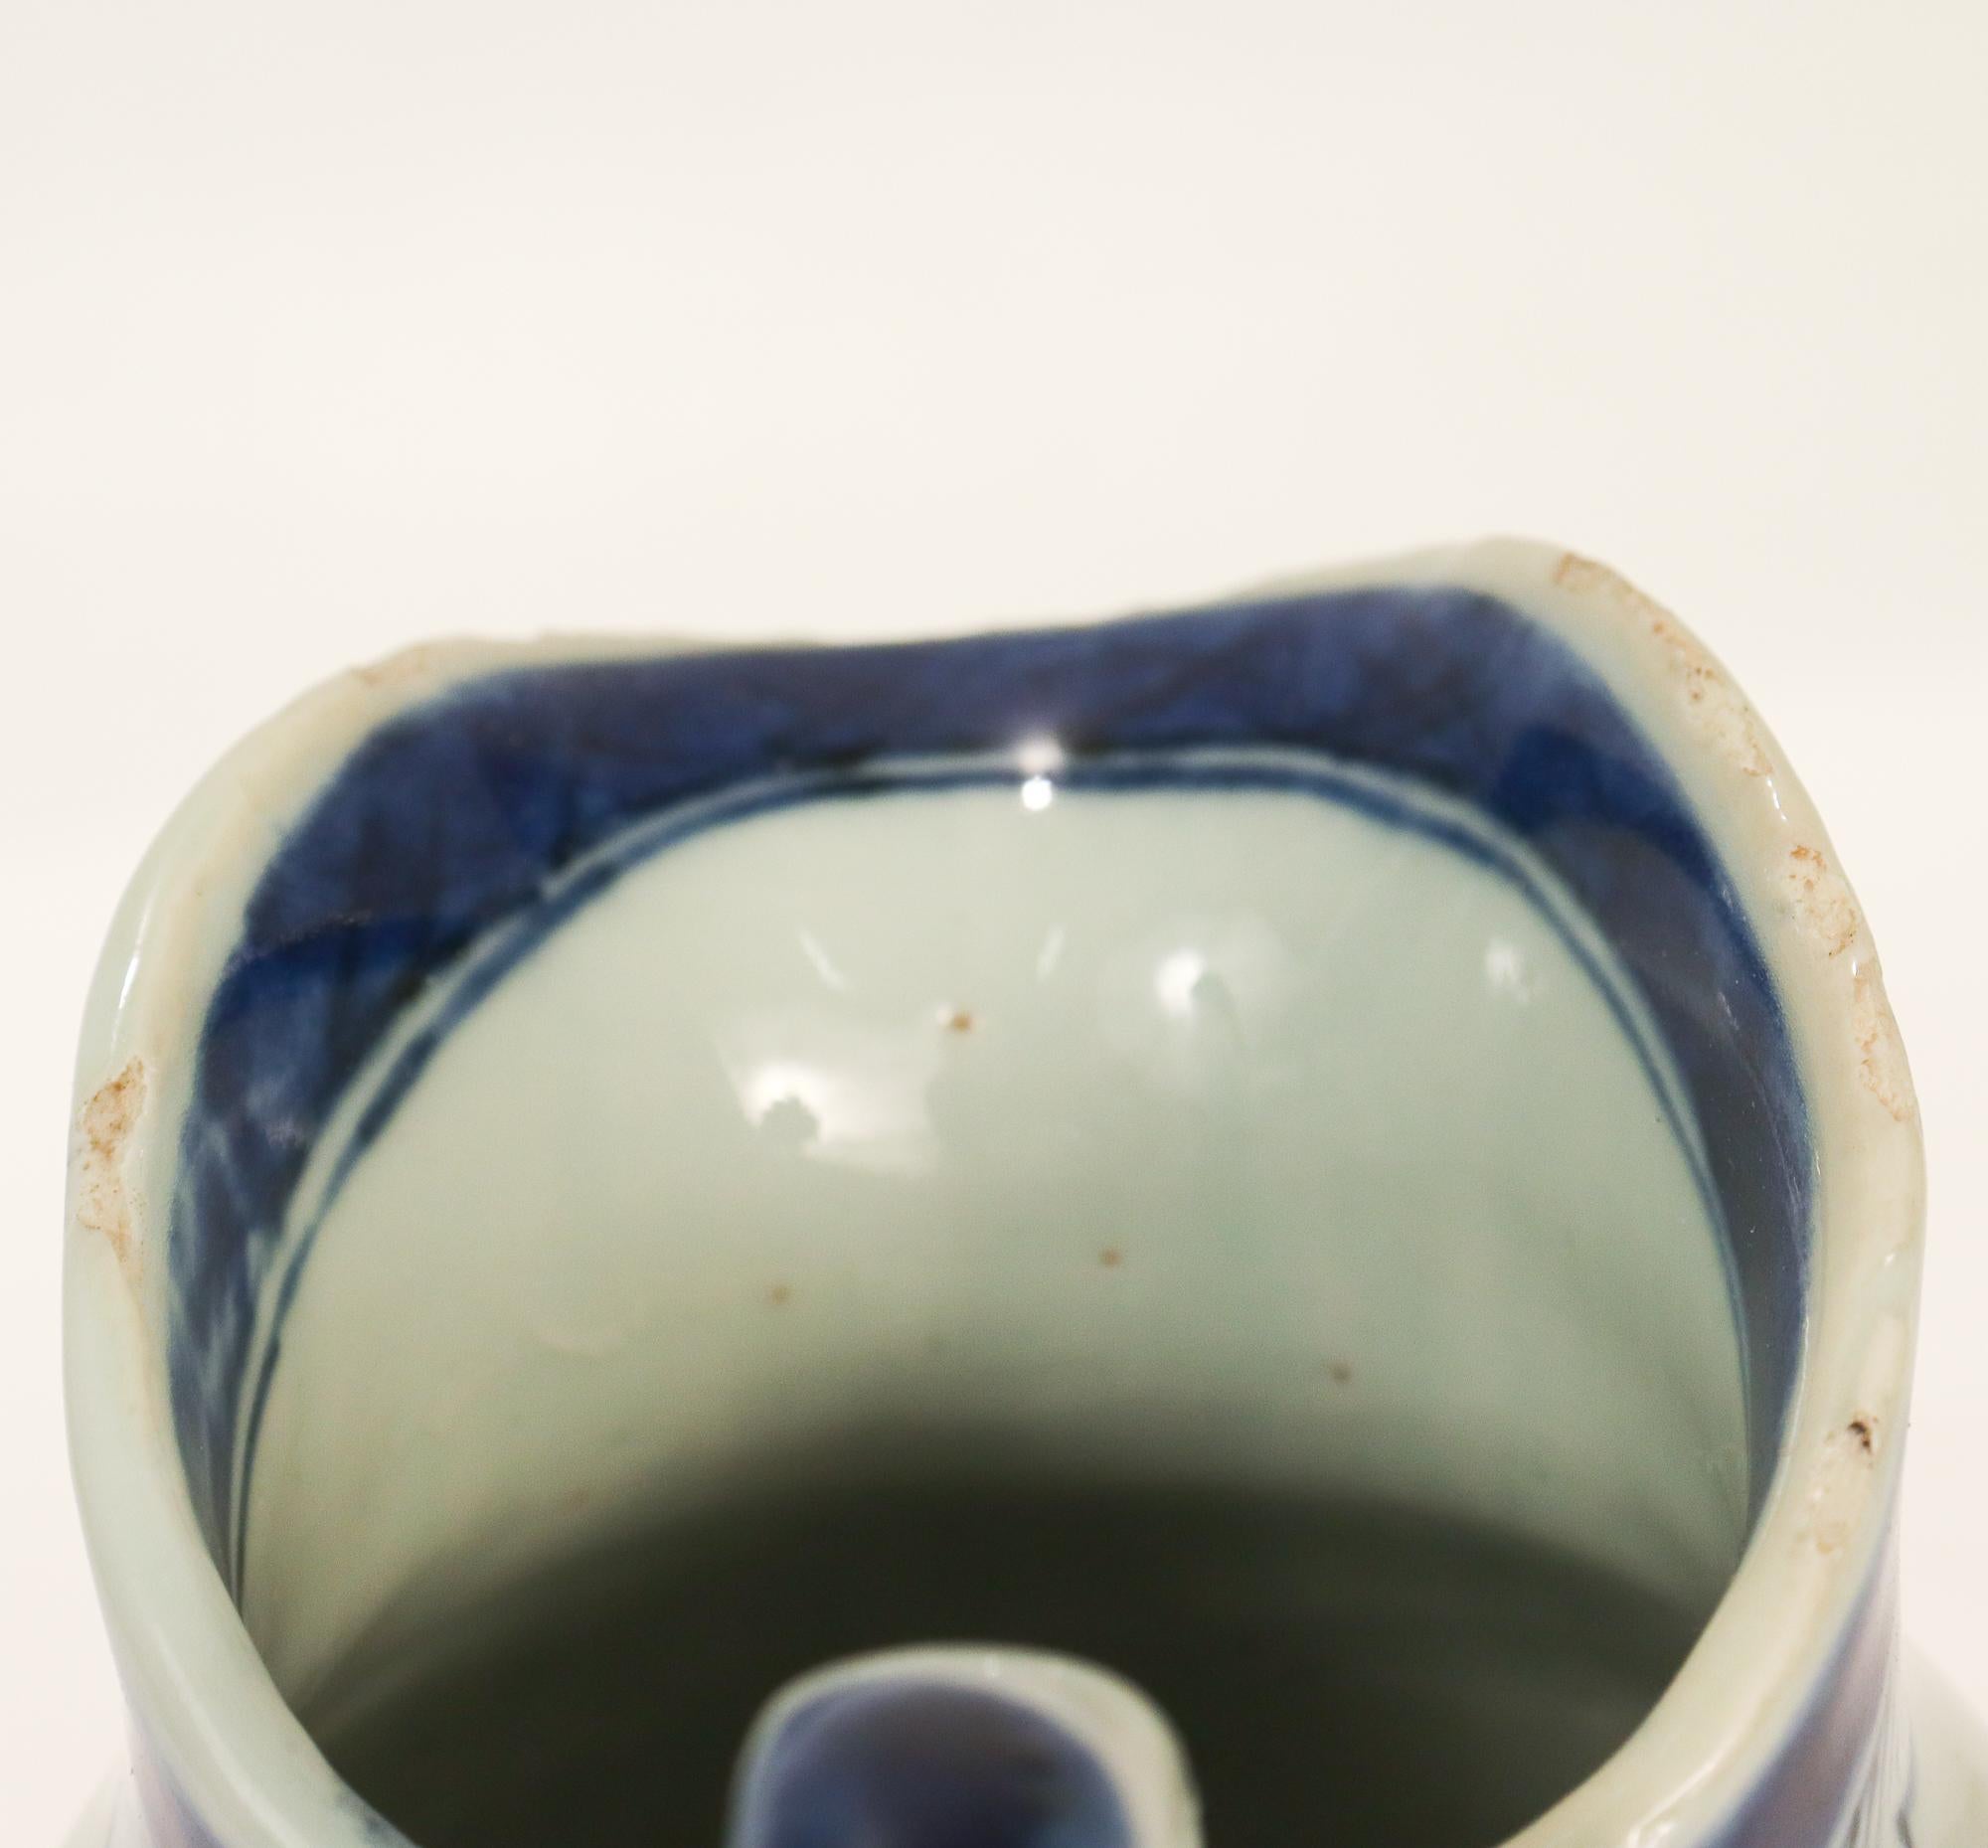 Antique Blue & White Canton Chinese Export Porcelain Pitcher or Jug 12